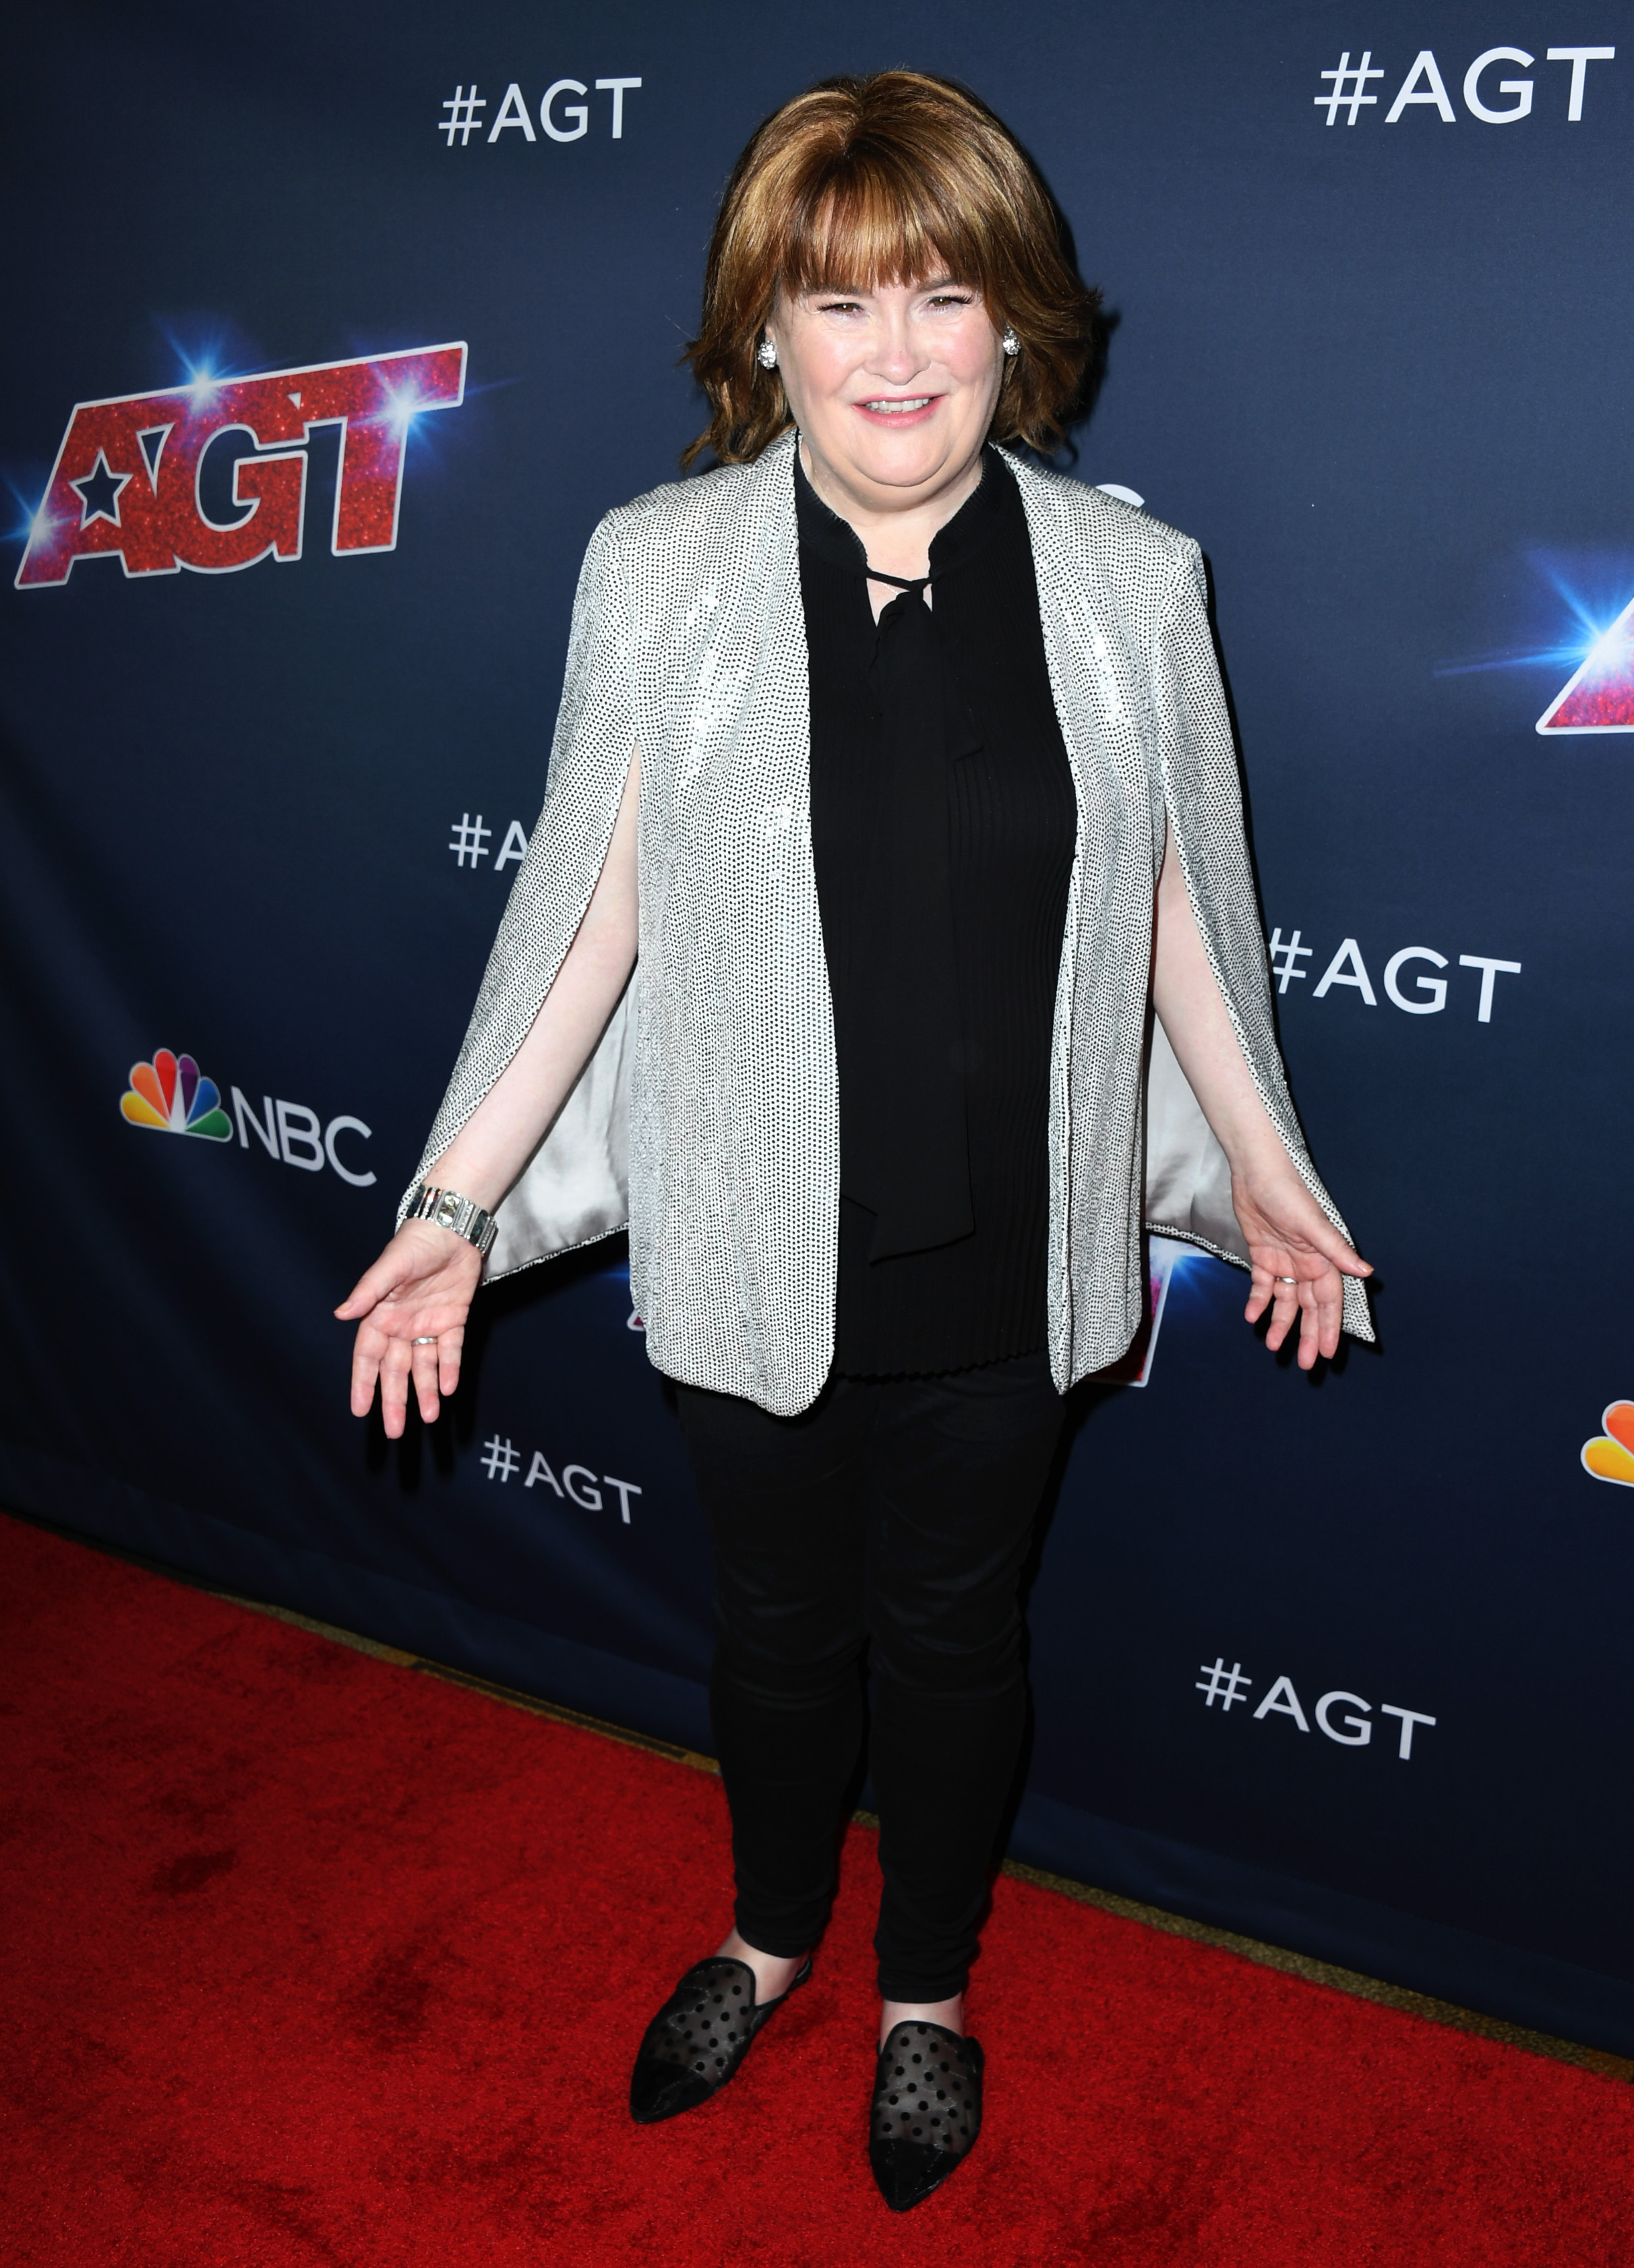 Susan Boyle attends "America's Got Talent" Season 14 on August 20, 2019 in Hollywood, California | Source: Getty Images